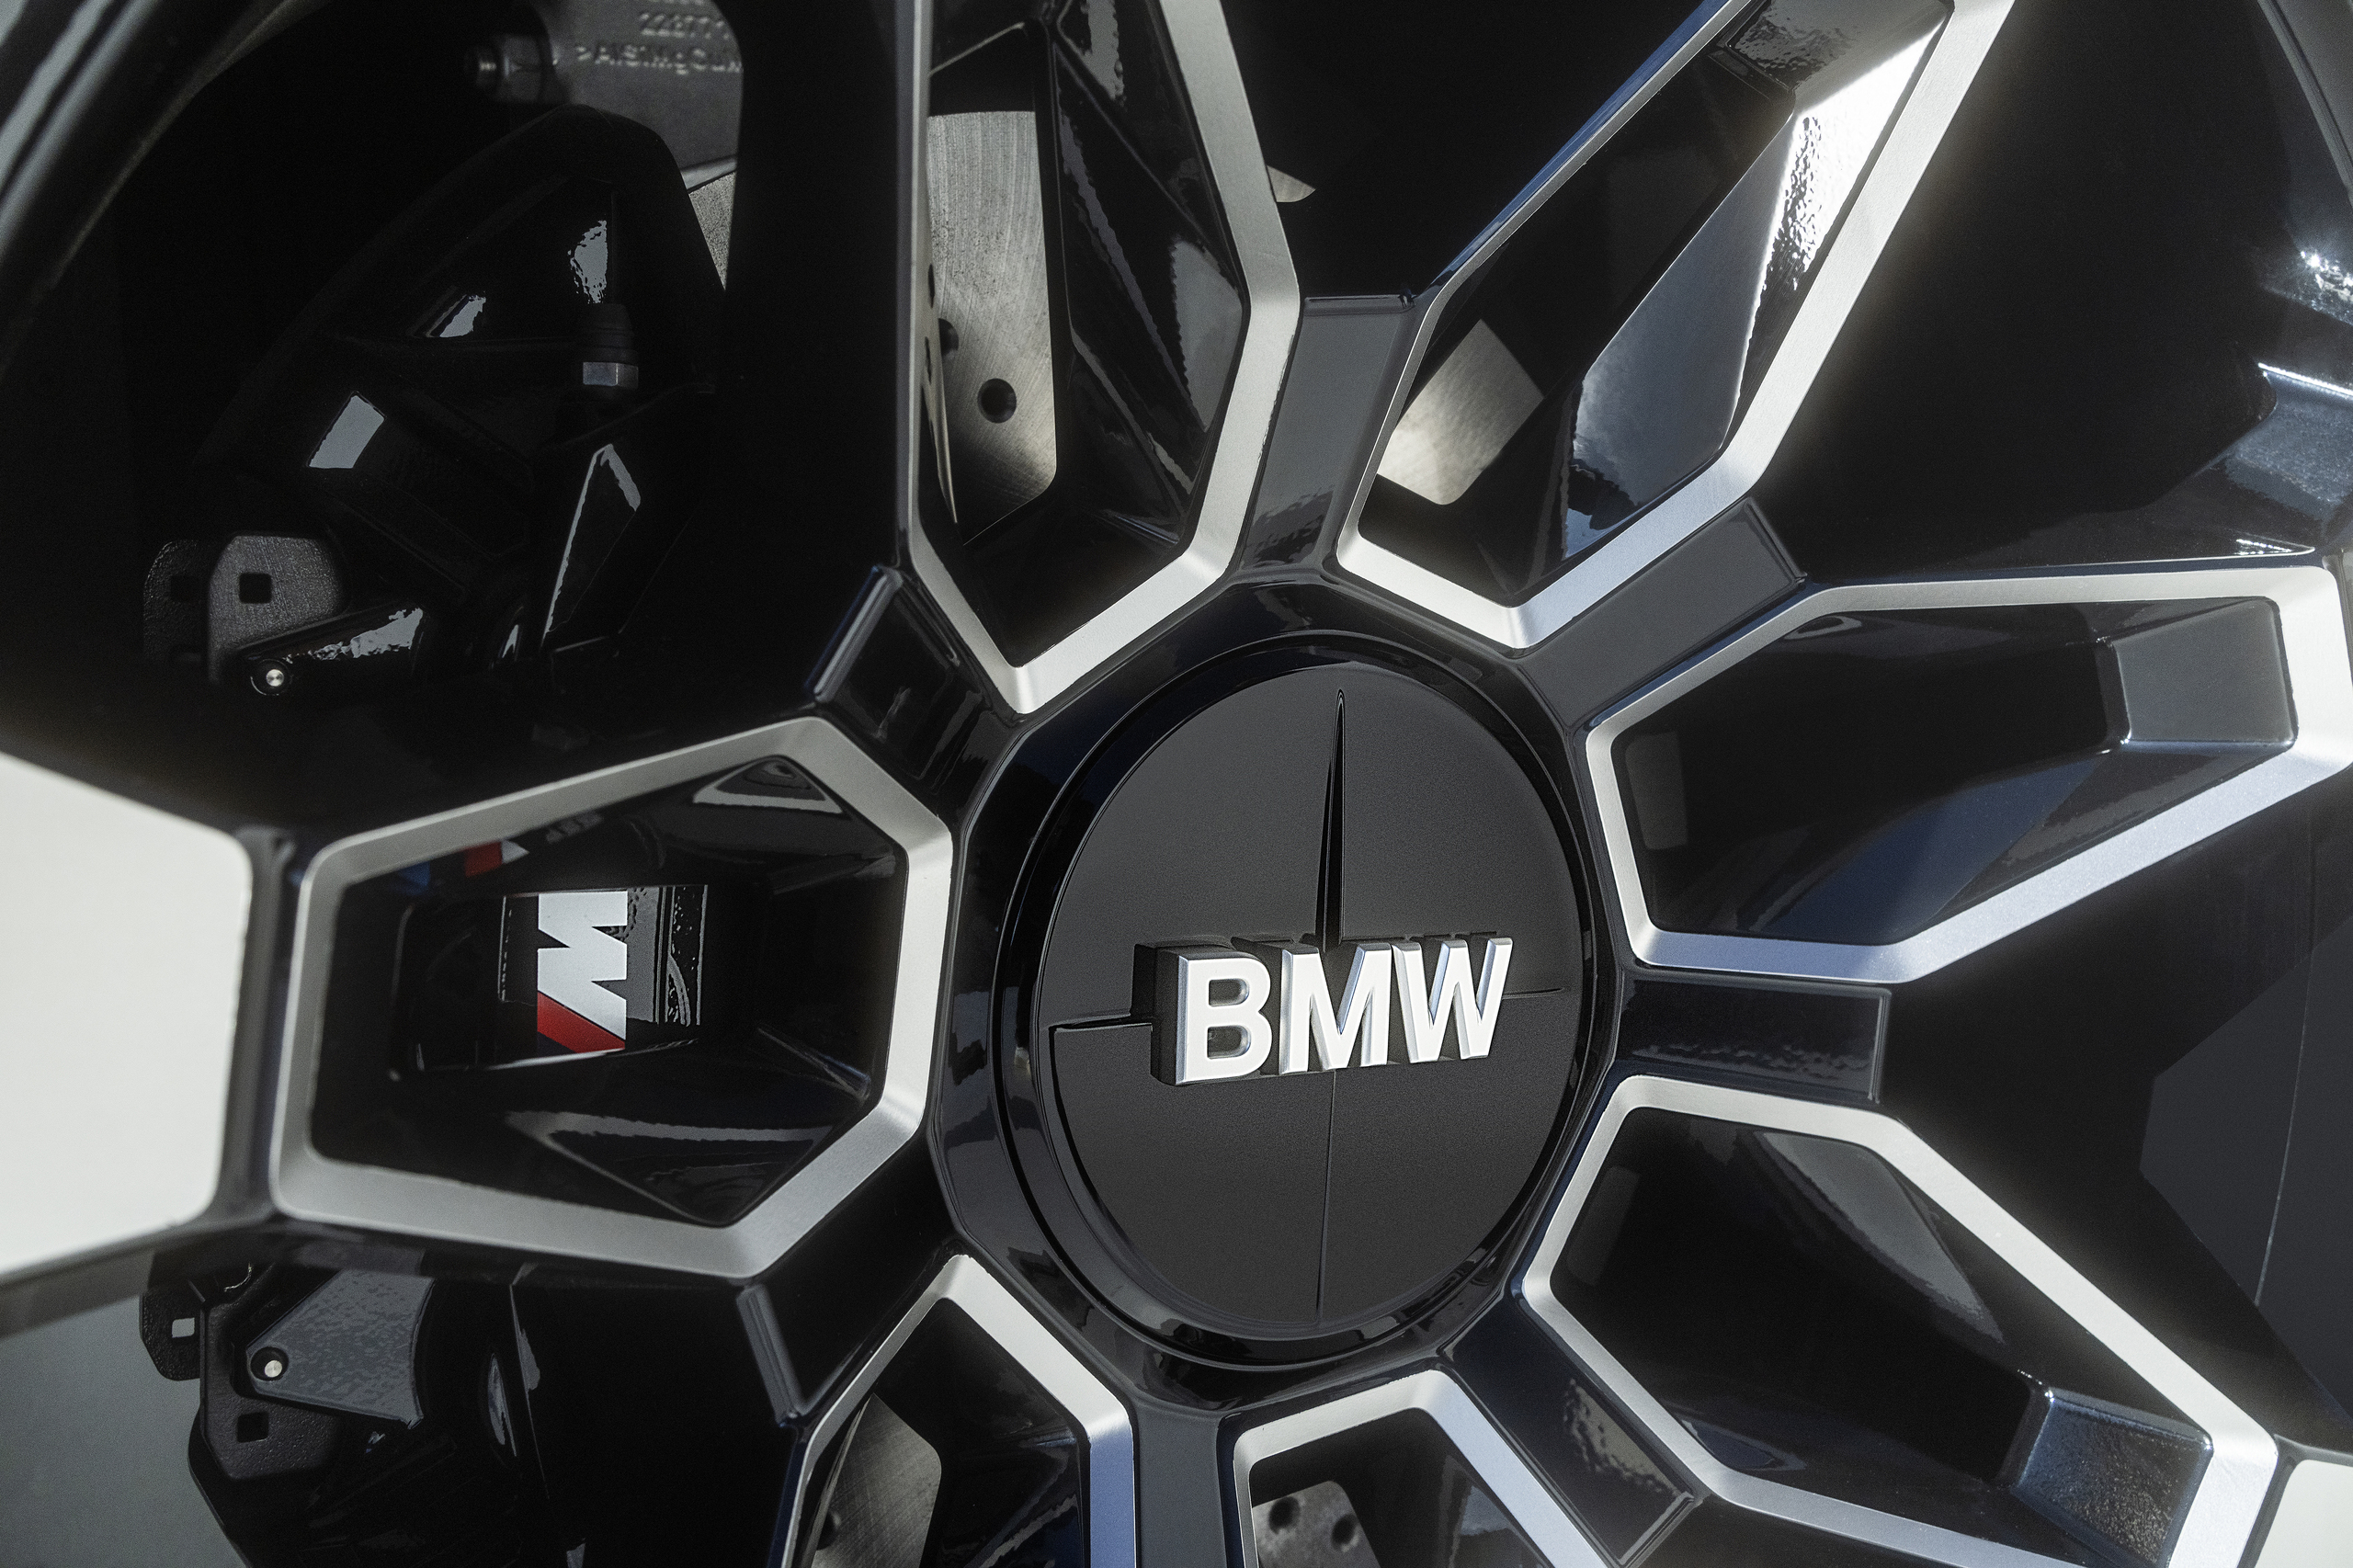 BMW has announced a mysterious new product for the Goodwood festival